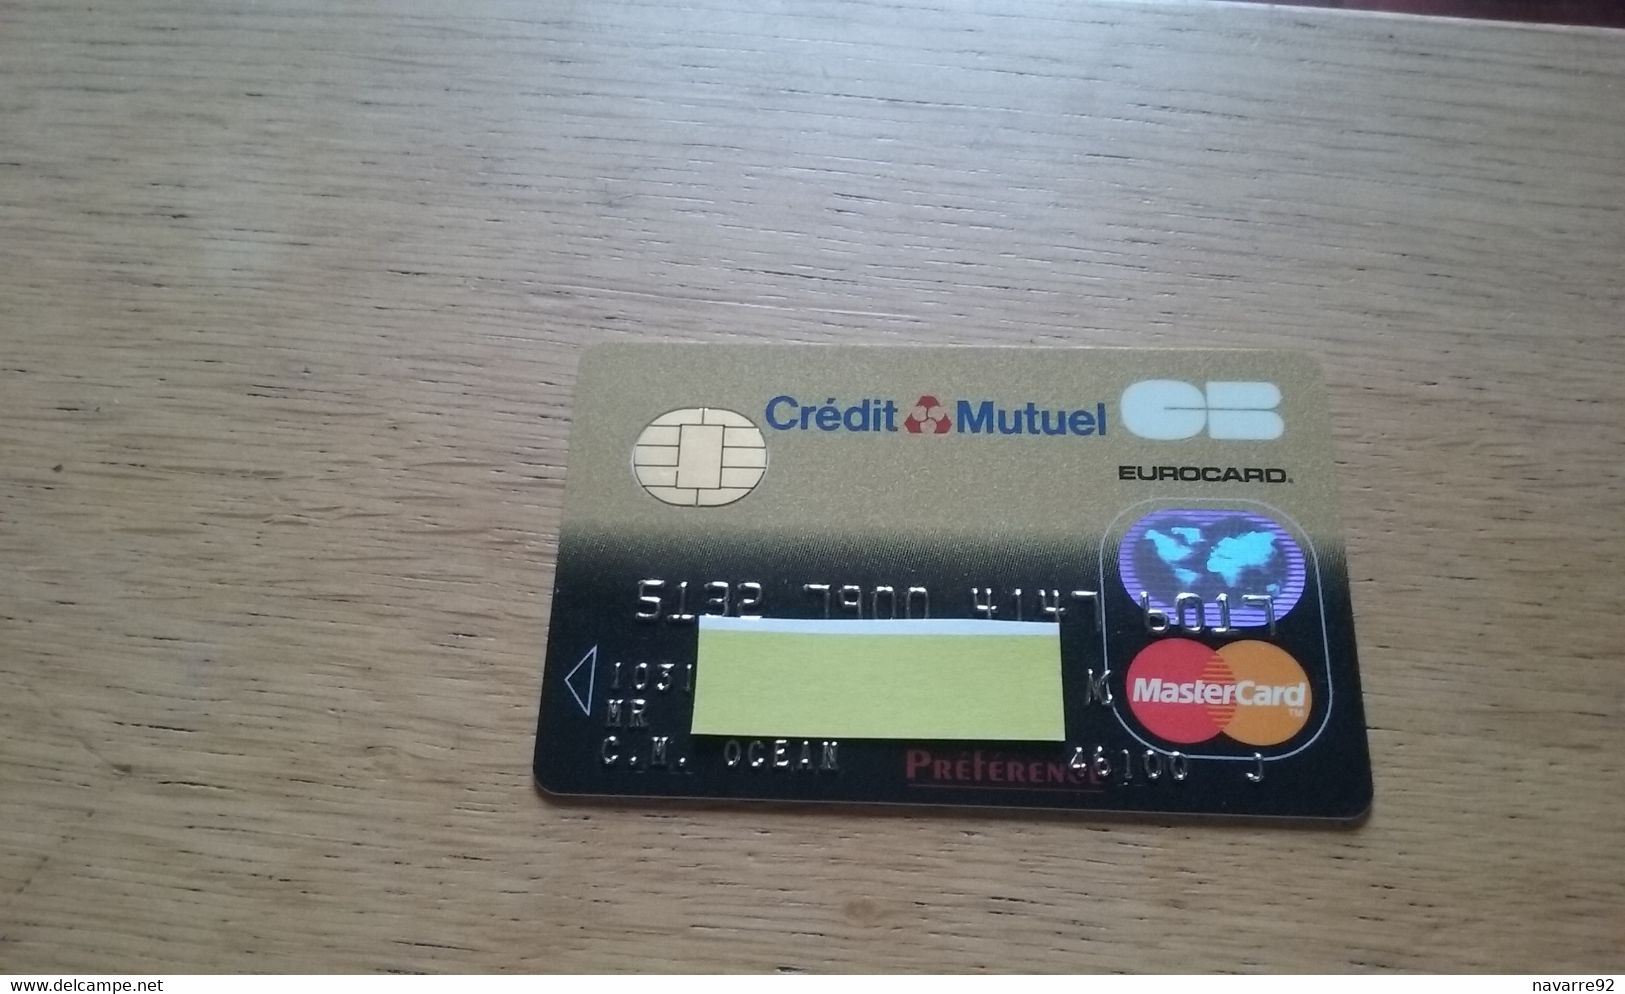 ANCIENNE CARTE A PUCE BANCAIRE CREDIT MUTUEL FIN ANNEES 90 !!! - Disposable Credit Card